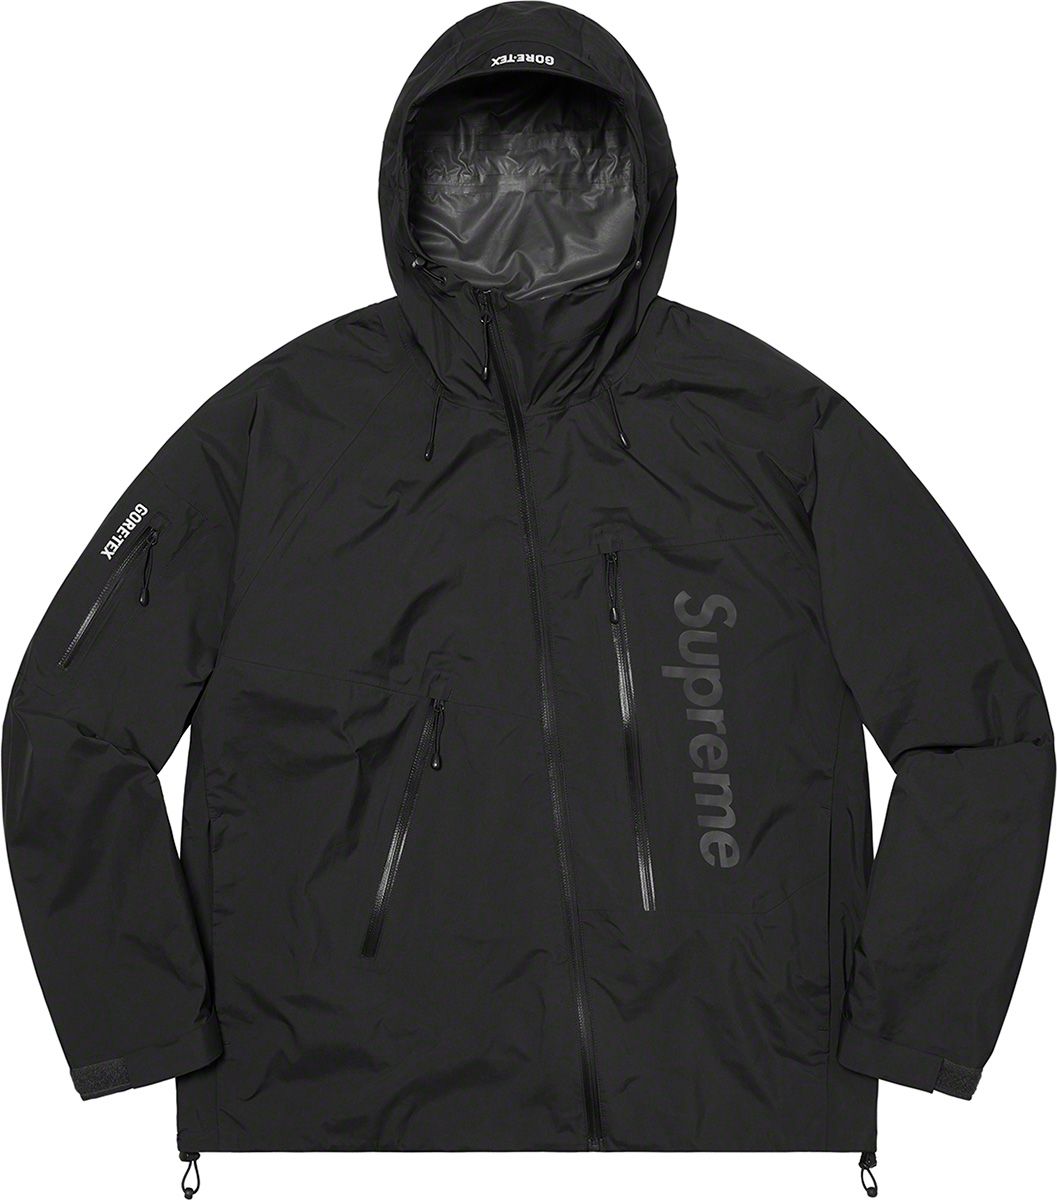 GORE-TEX Paclite Shell Jacket - Spring/Summer 2021 Preview